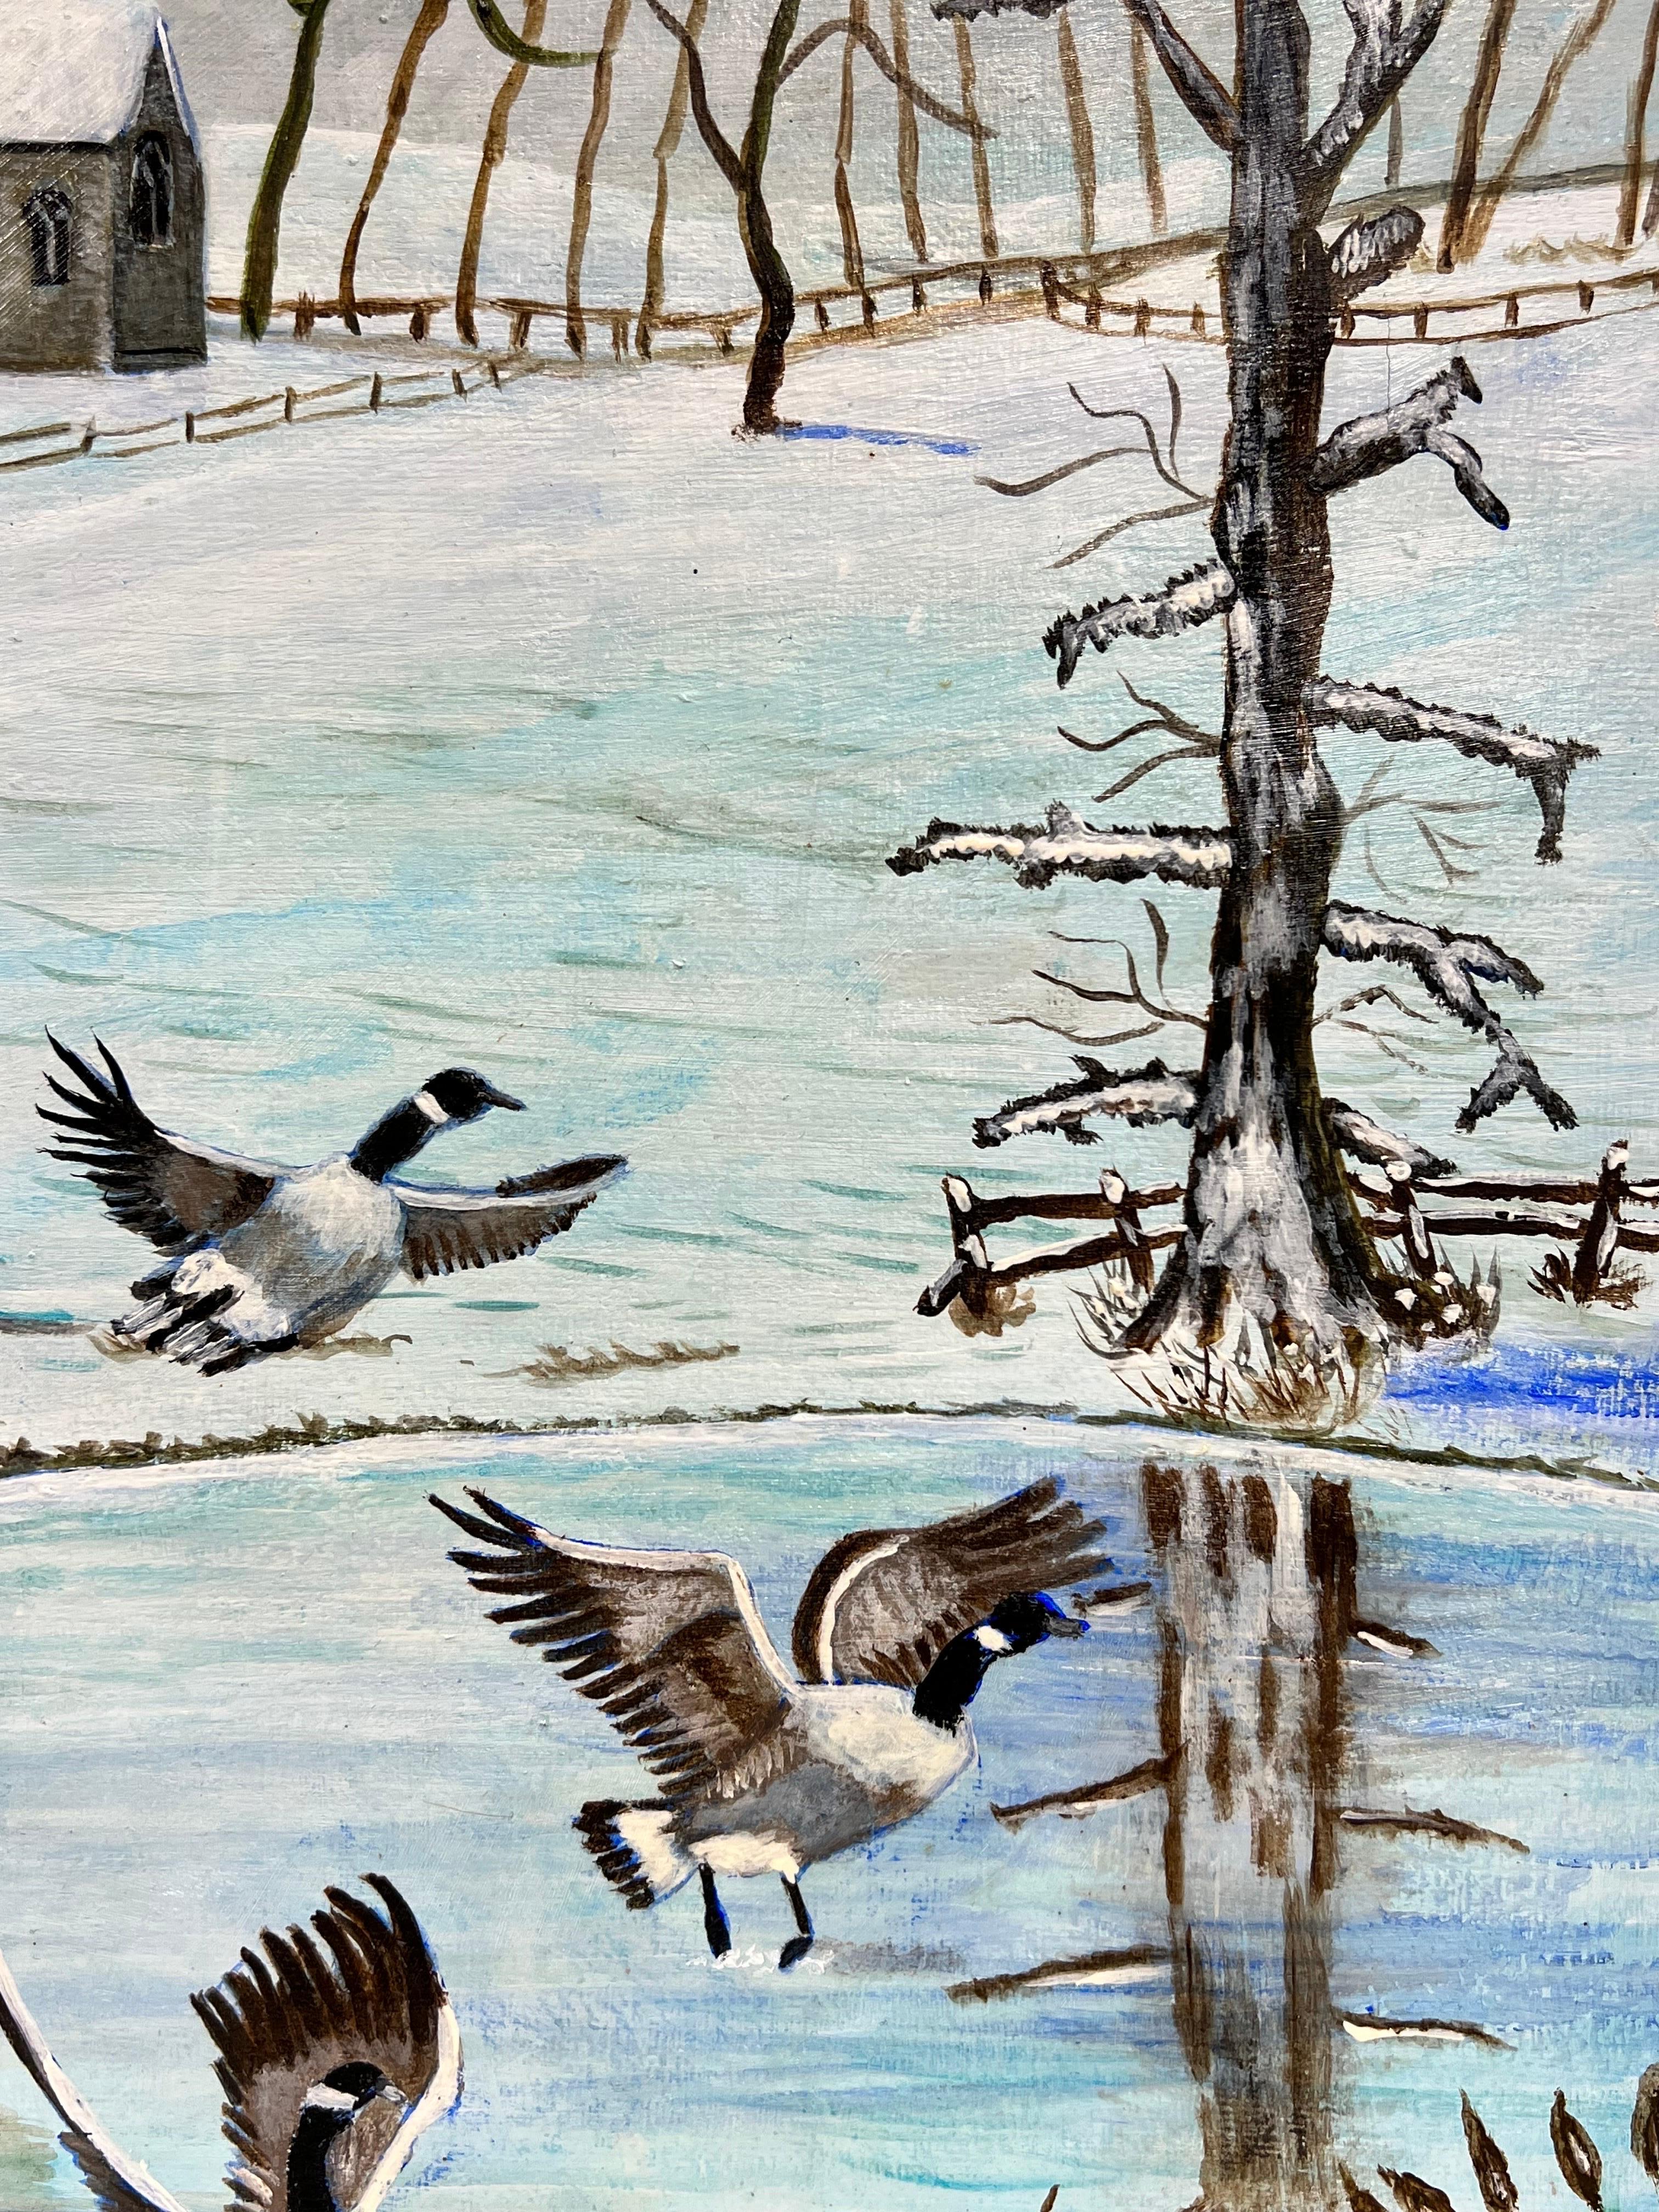 British Modern Oil Painting Geese in Winter Landscape on Frozen Lake For Sale 3